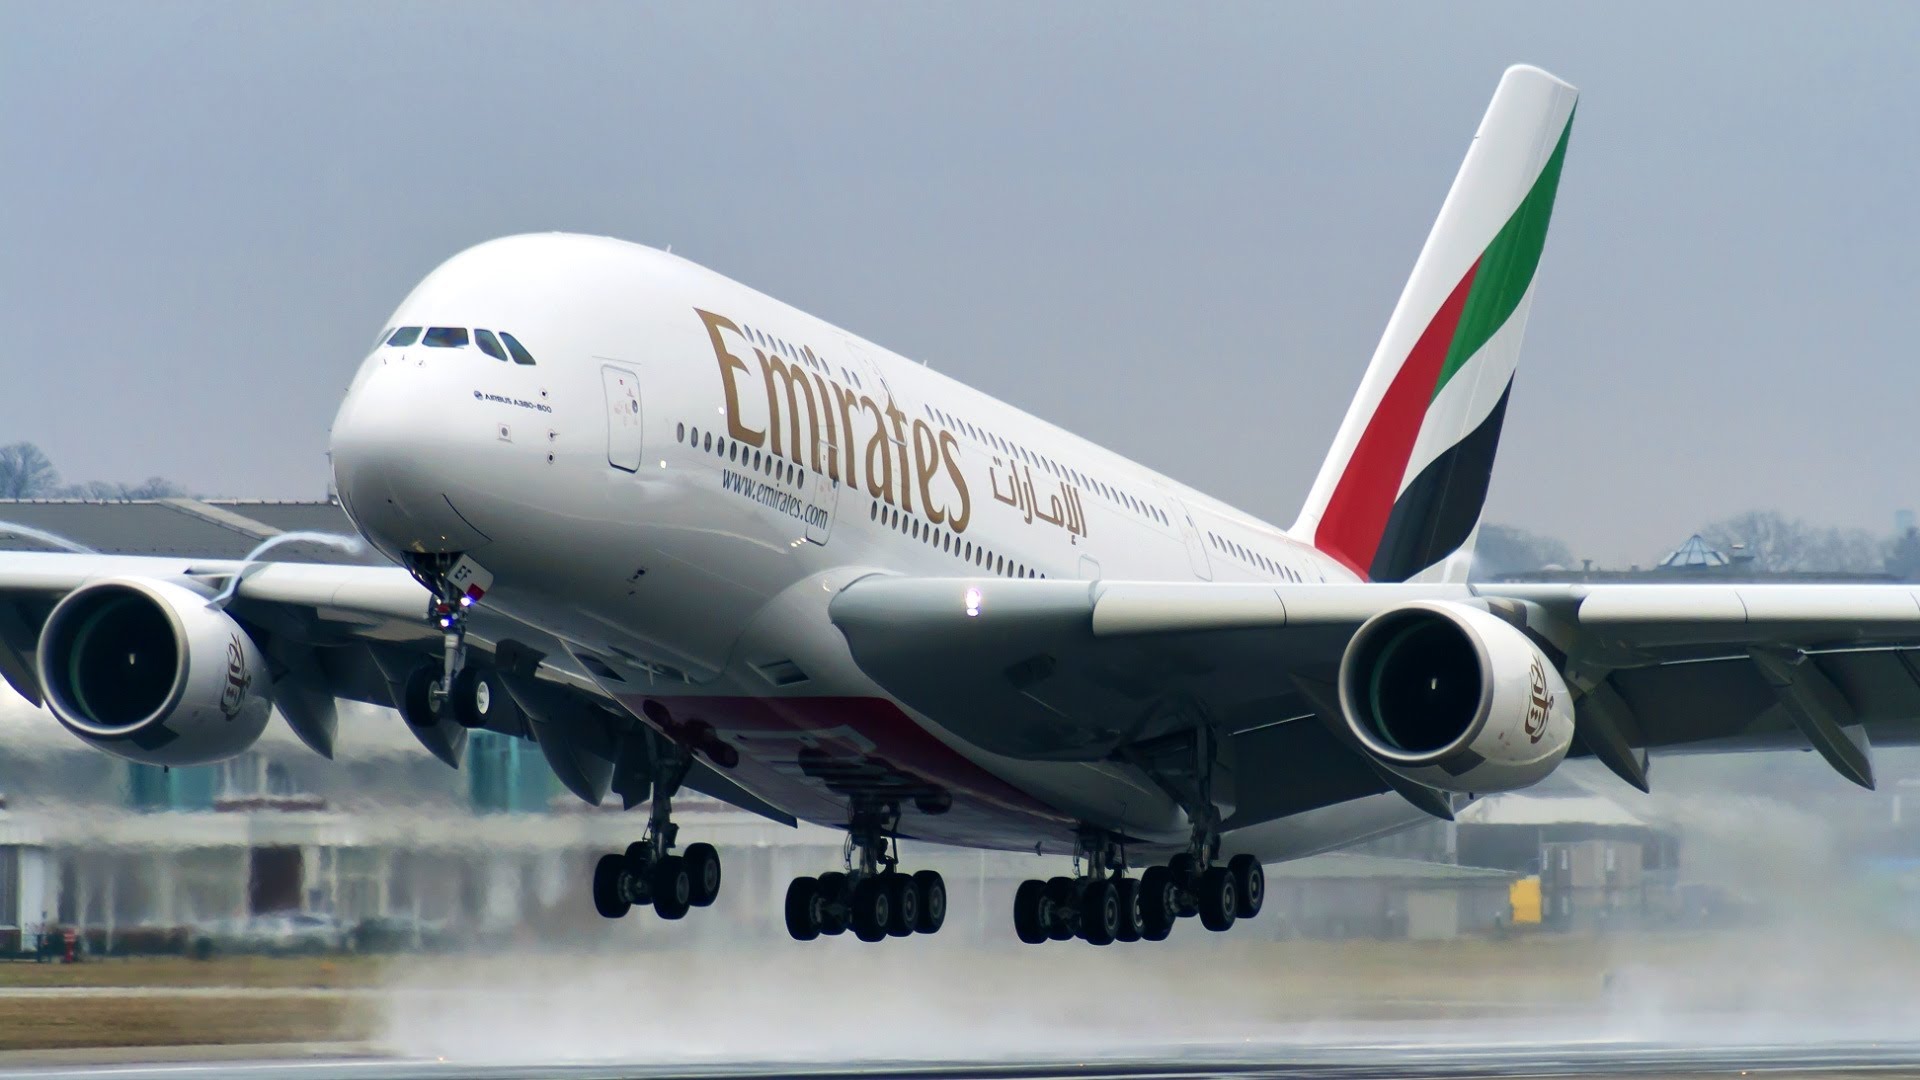 The Airbus A380 Emirates airline takes off wallpapers and images